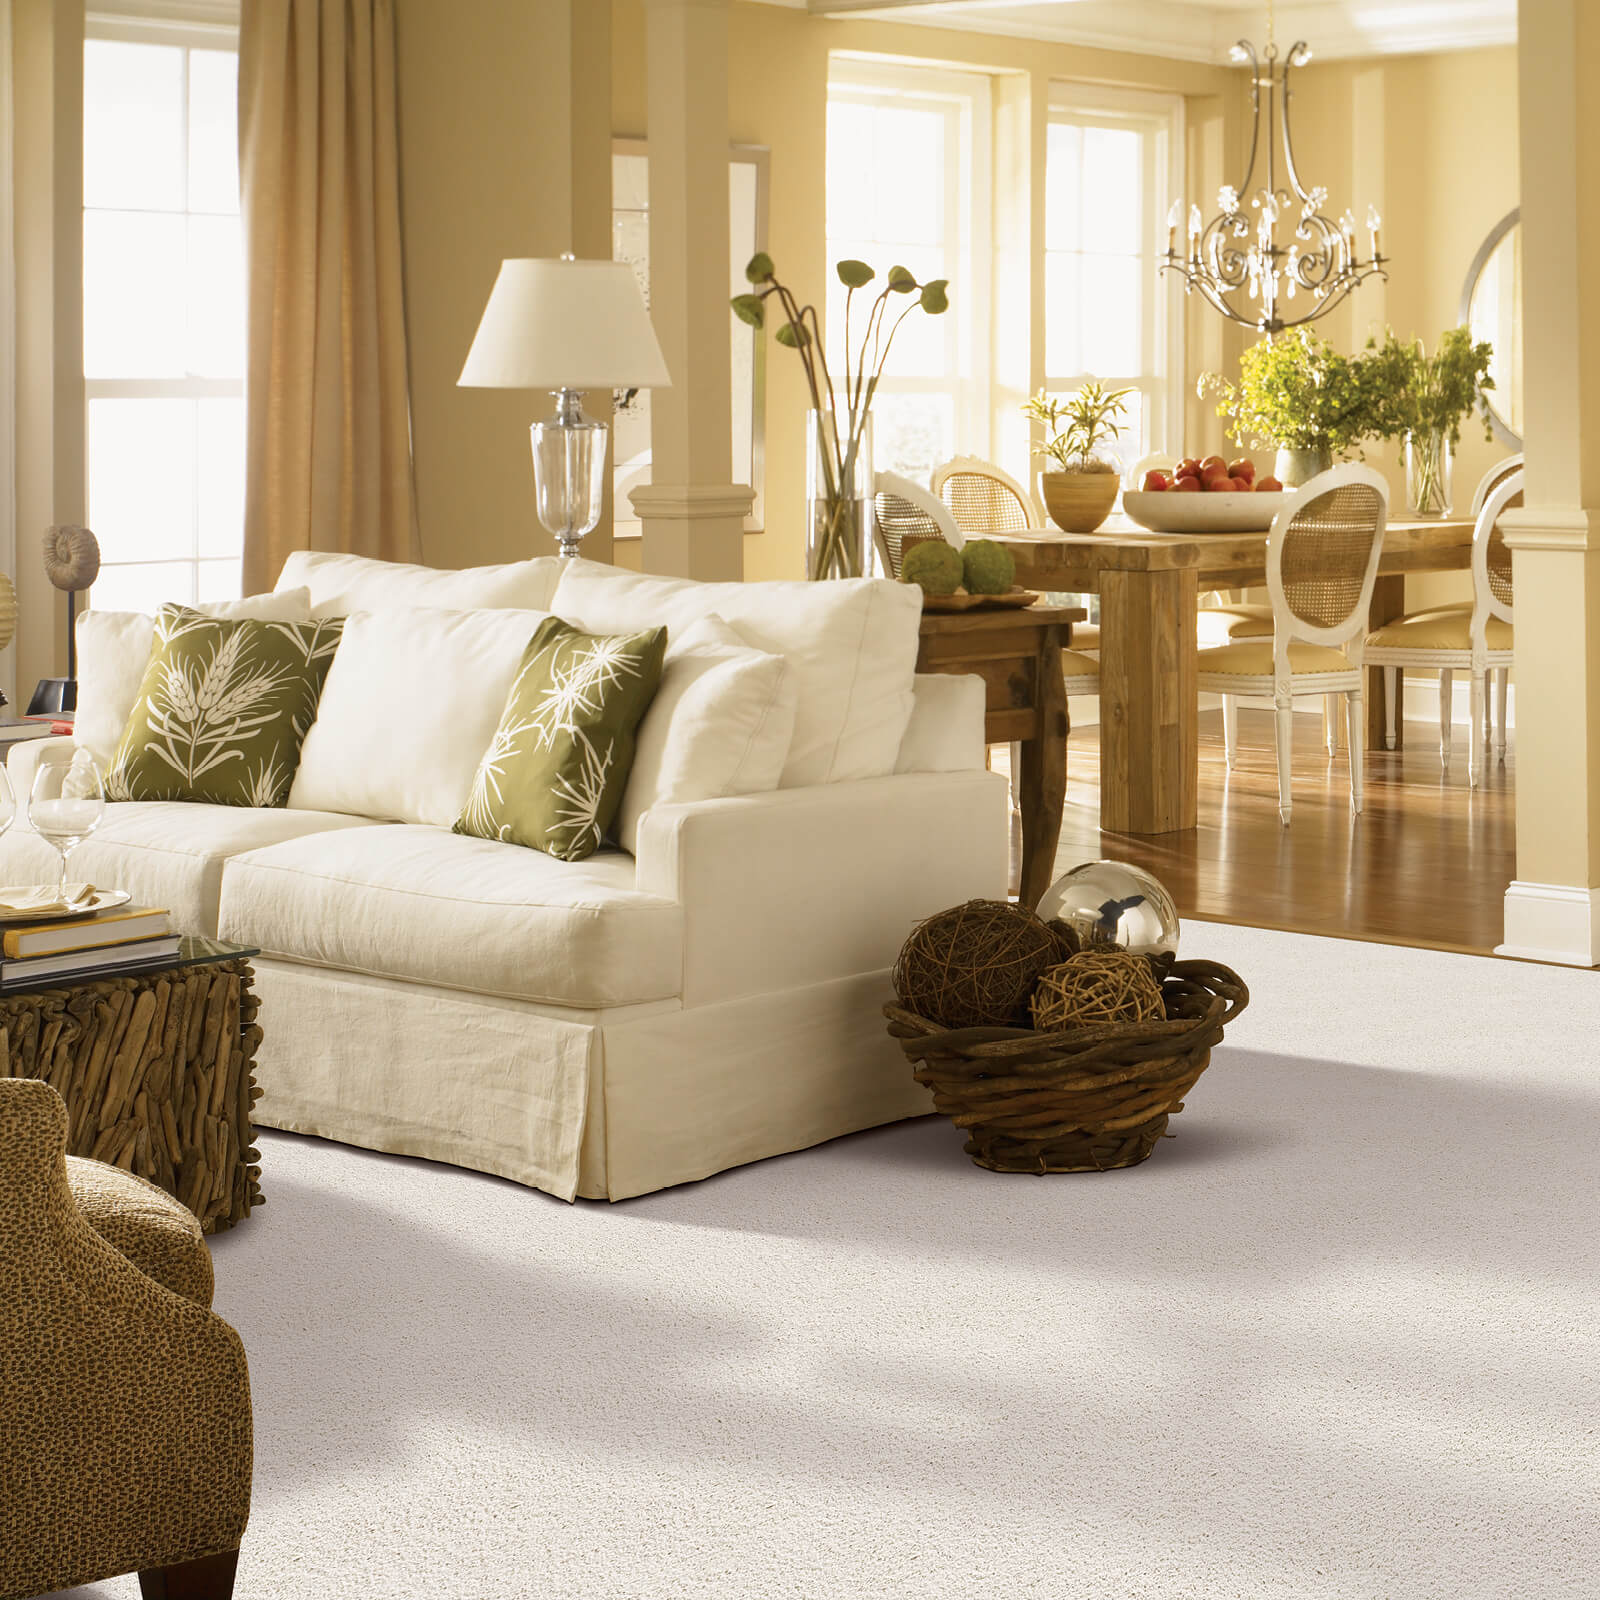 Carpeting in Living Room | Rockwall Floor and Paint